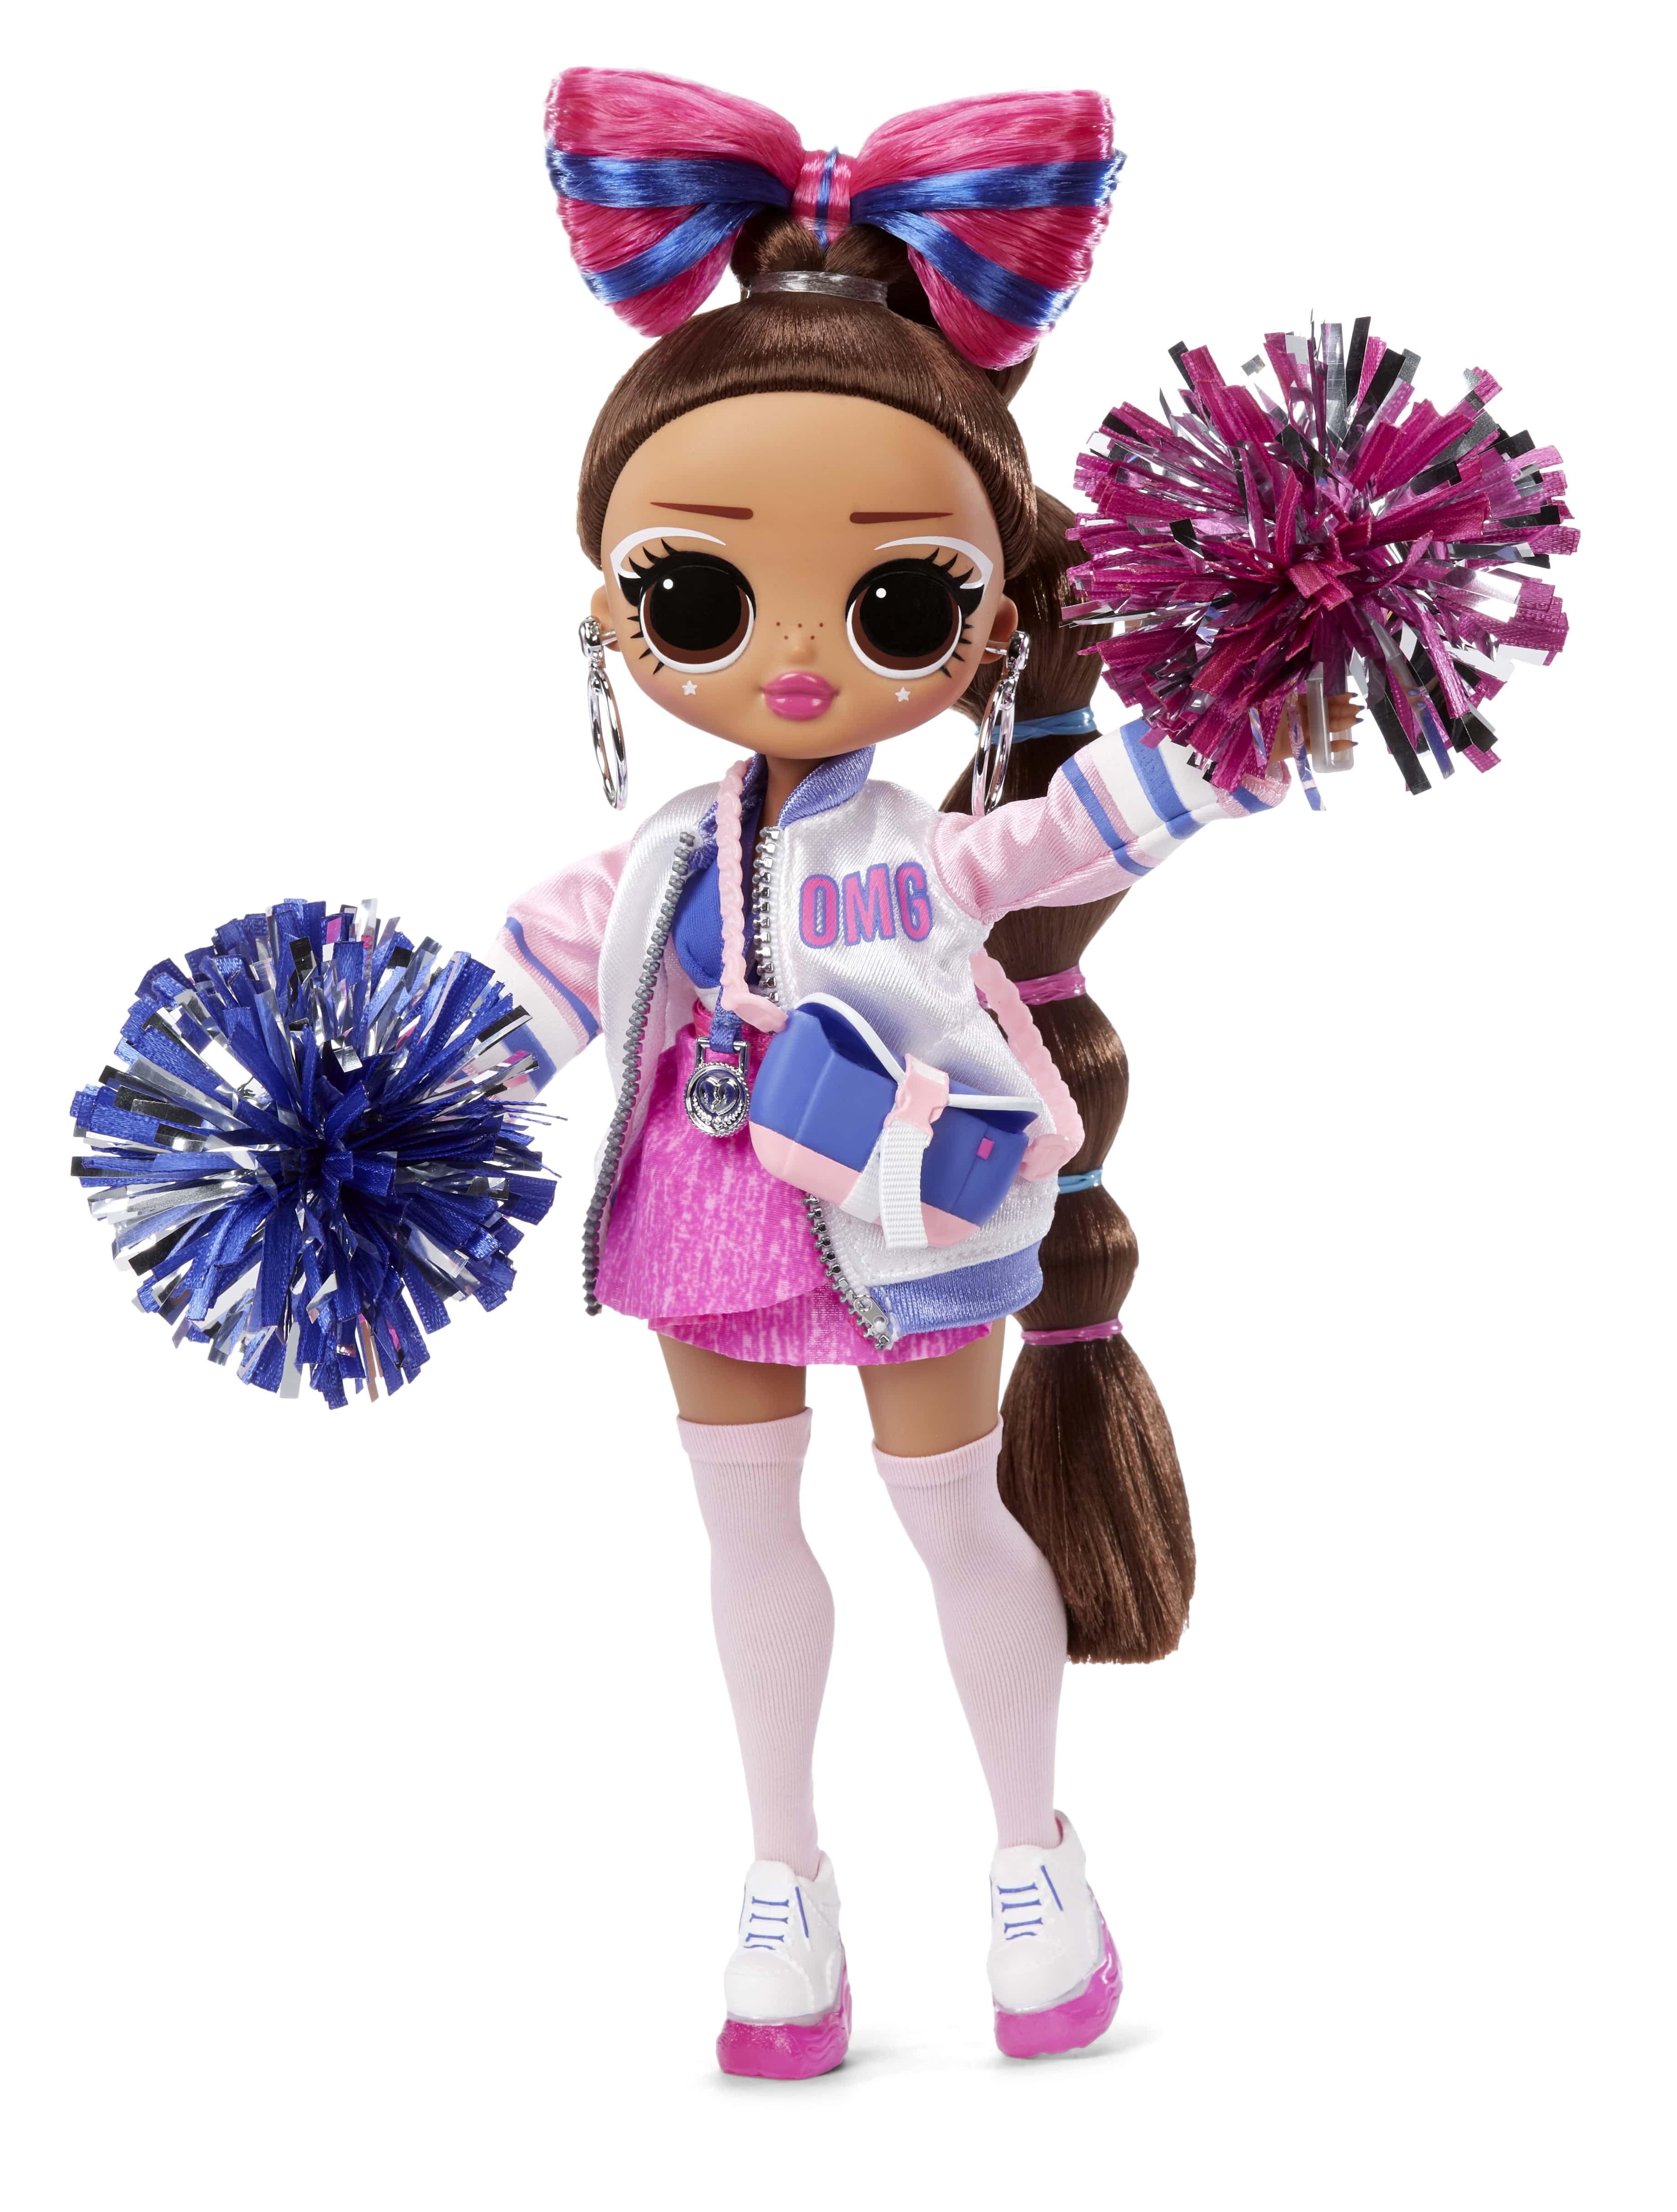 Cheerleading Outfit For Doll or 15" Bear 19 Different Colors To Choose From 12PK 